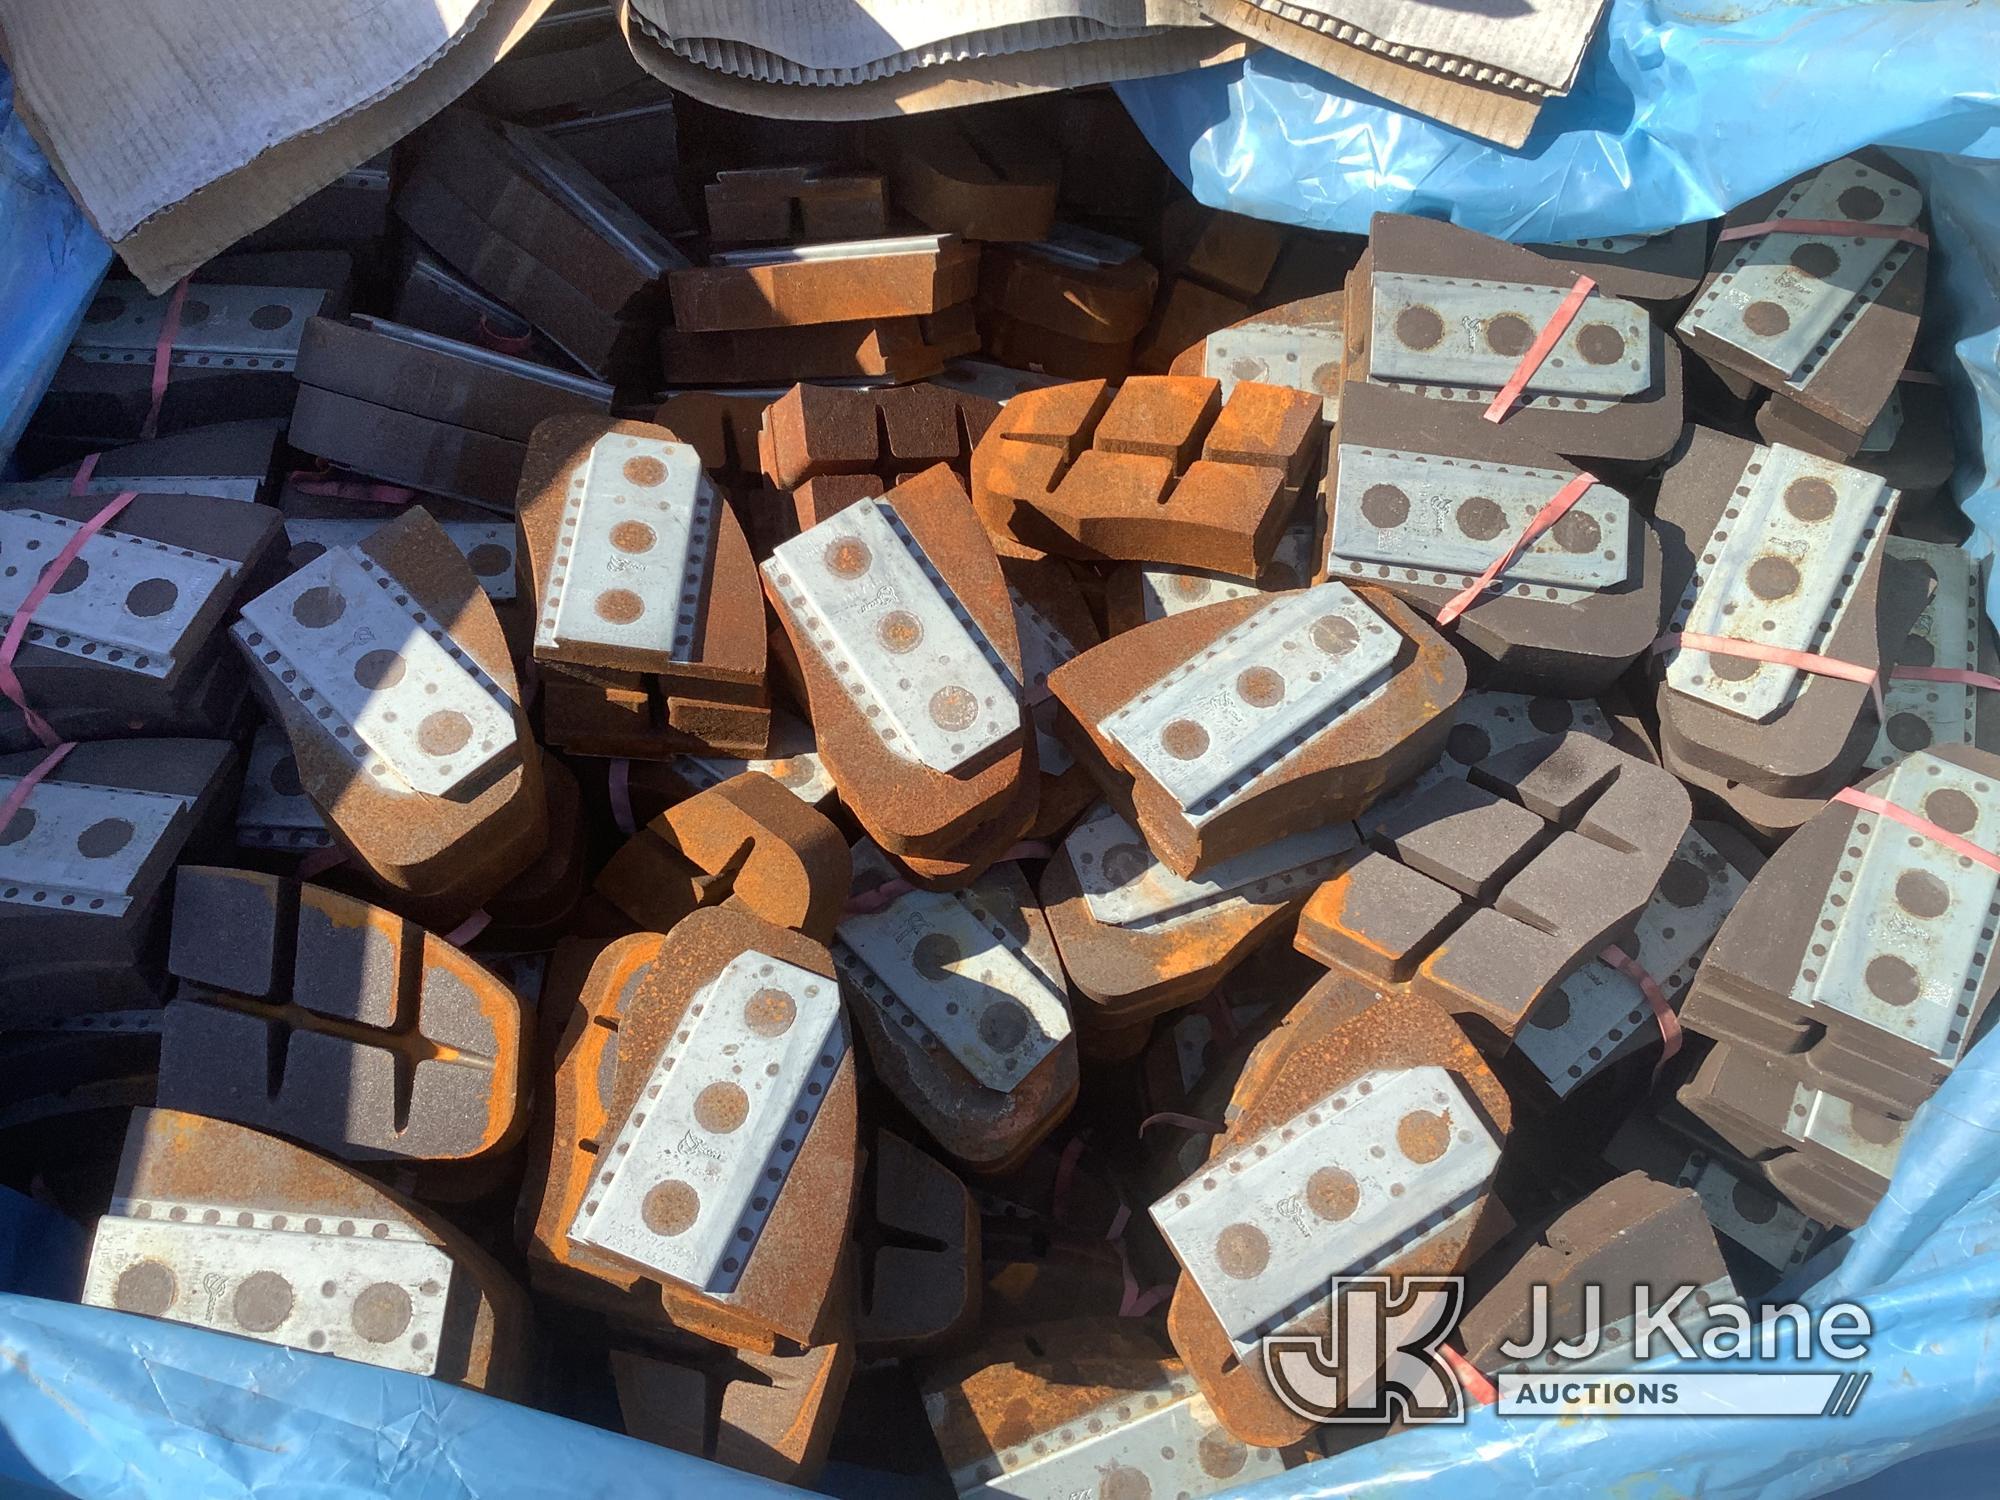 (Jurupa Valley, CA) 5 Crates Of Bus Brake Pads (Used) NOTE: This unit is being sold AS IS/WHERE IS v